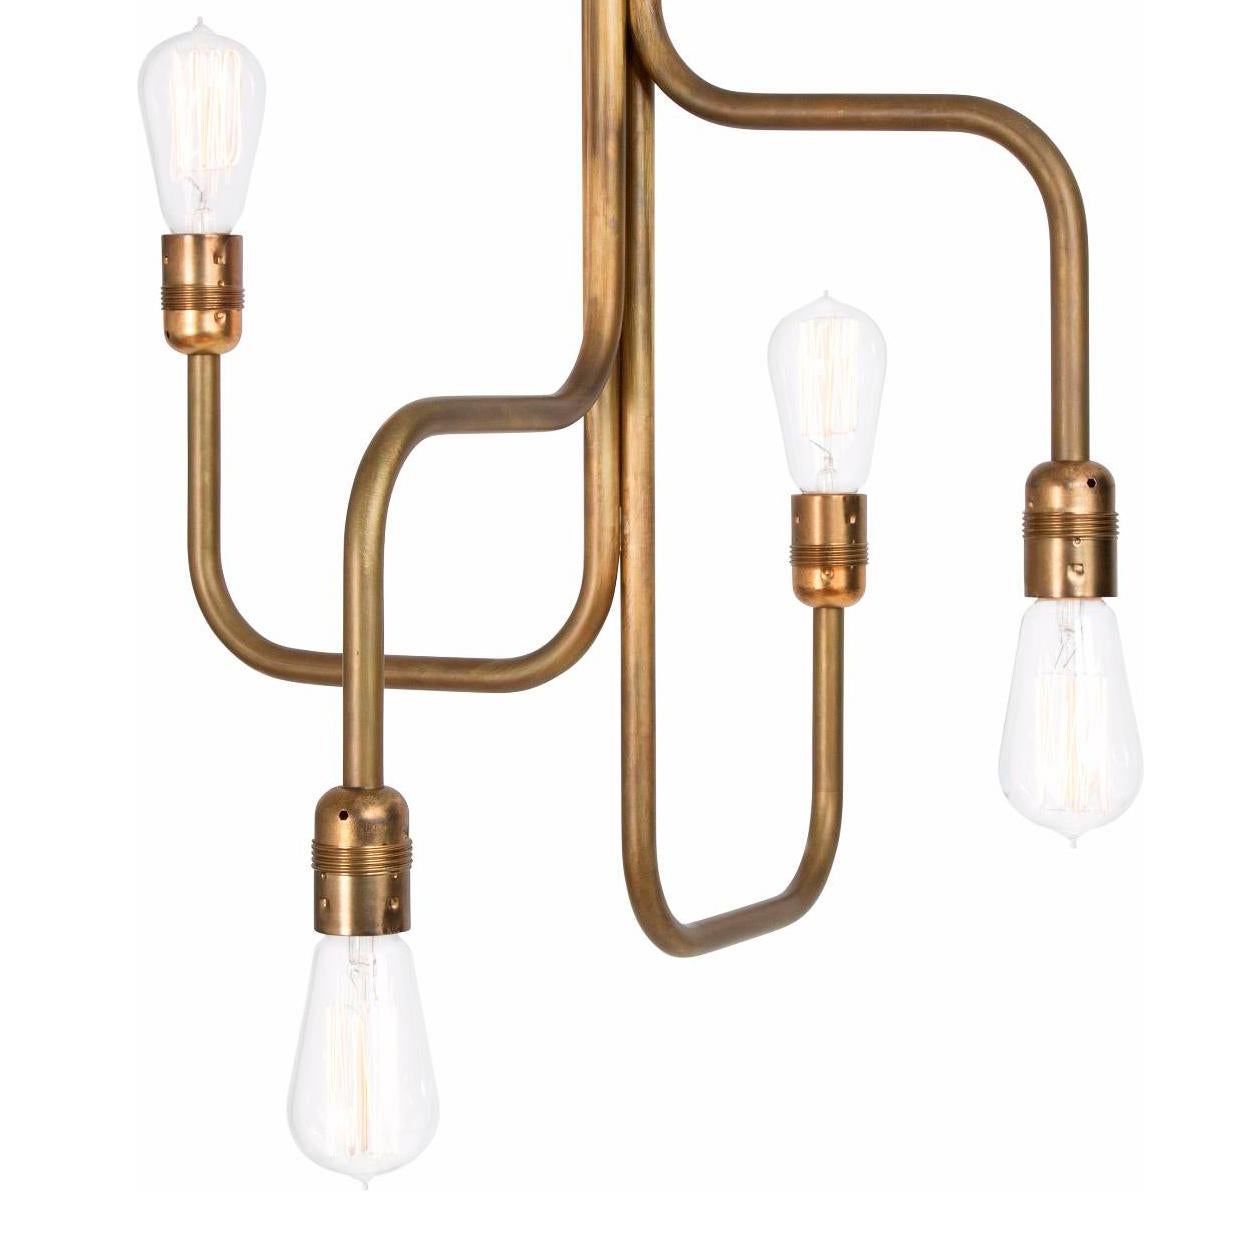 Ceiling lamp designed by Sabina Grubbeson manufactured by Konsthantverk Tyringe in Sweden.

Strapatz ceiling small
Measures: D 450 mm
H 600 mm, cord 3 m
Max 4 x 60 W E27
3414-6 raw brass

The lamps are wiring with standard Europe wiring.

This lamp